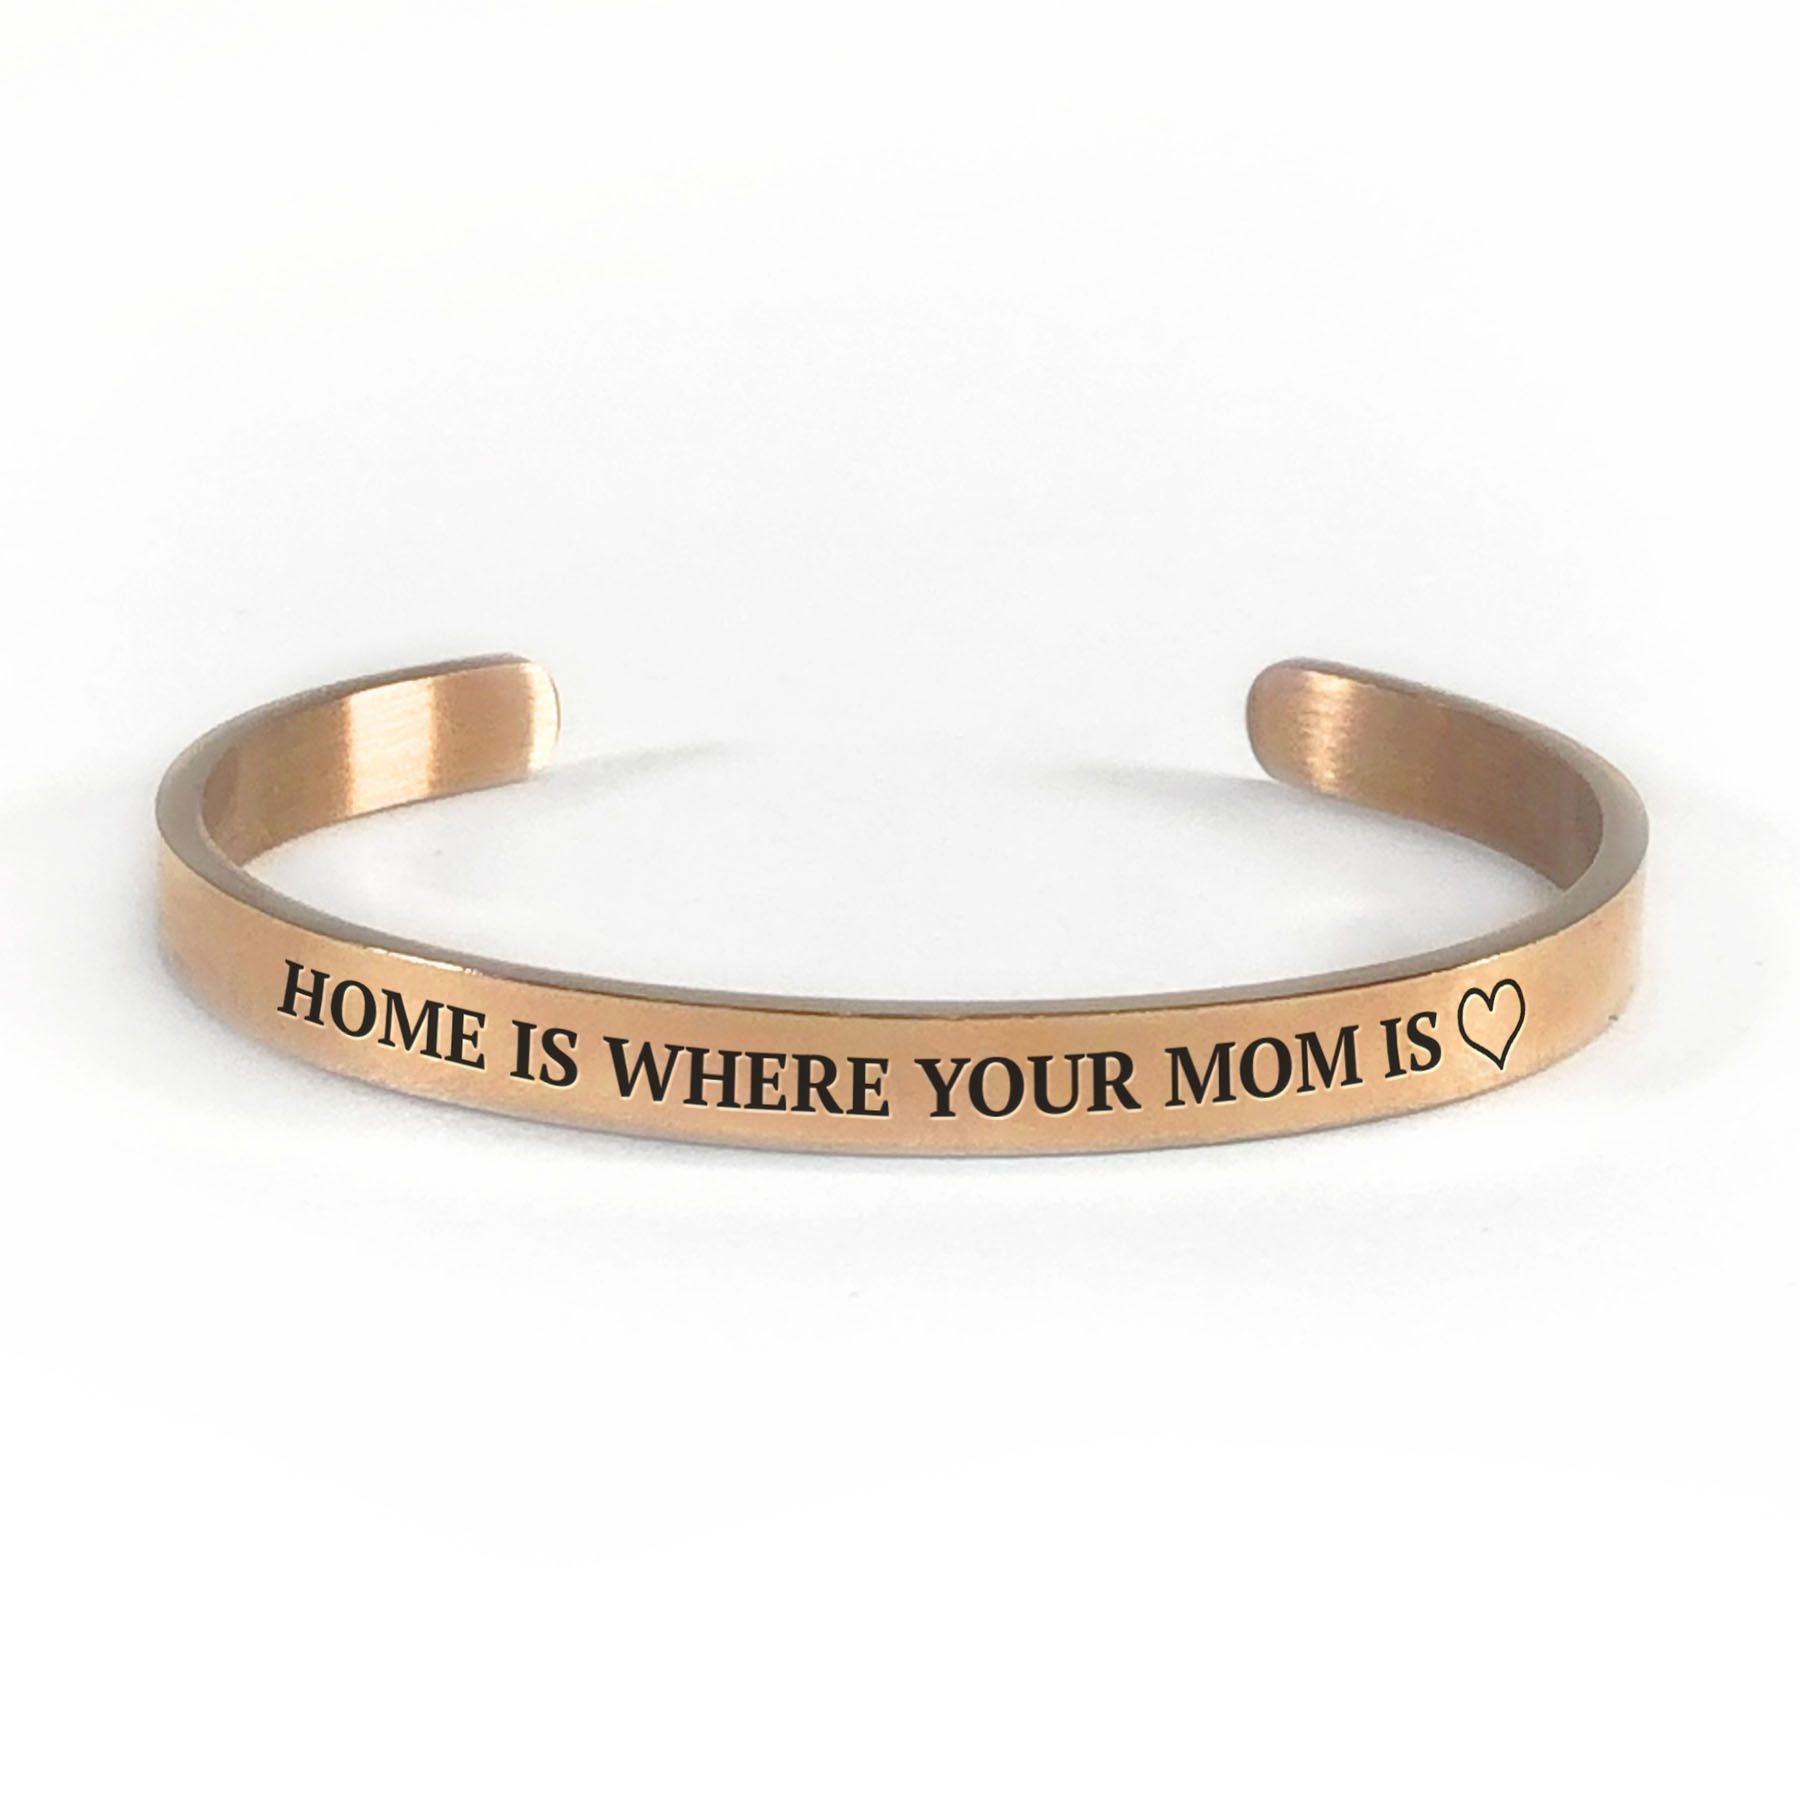 Home is where your mom is bracelet with rose gold plating